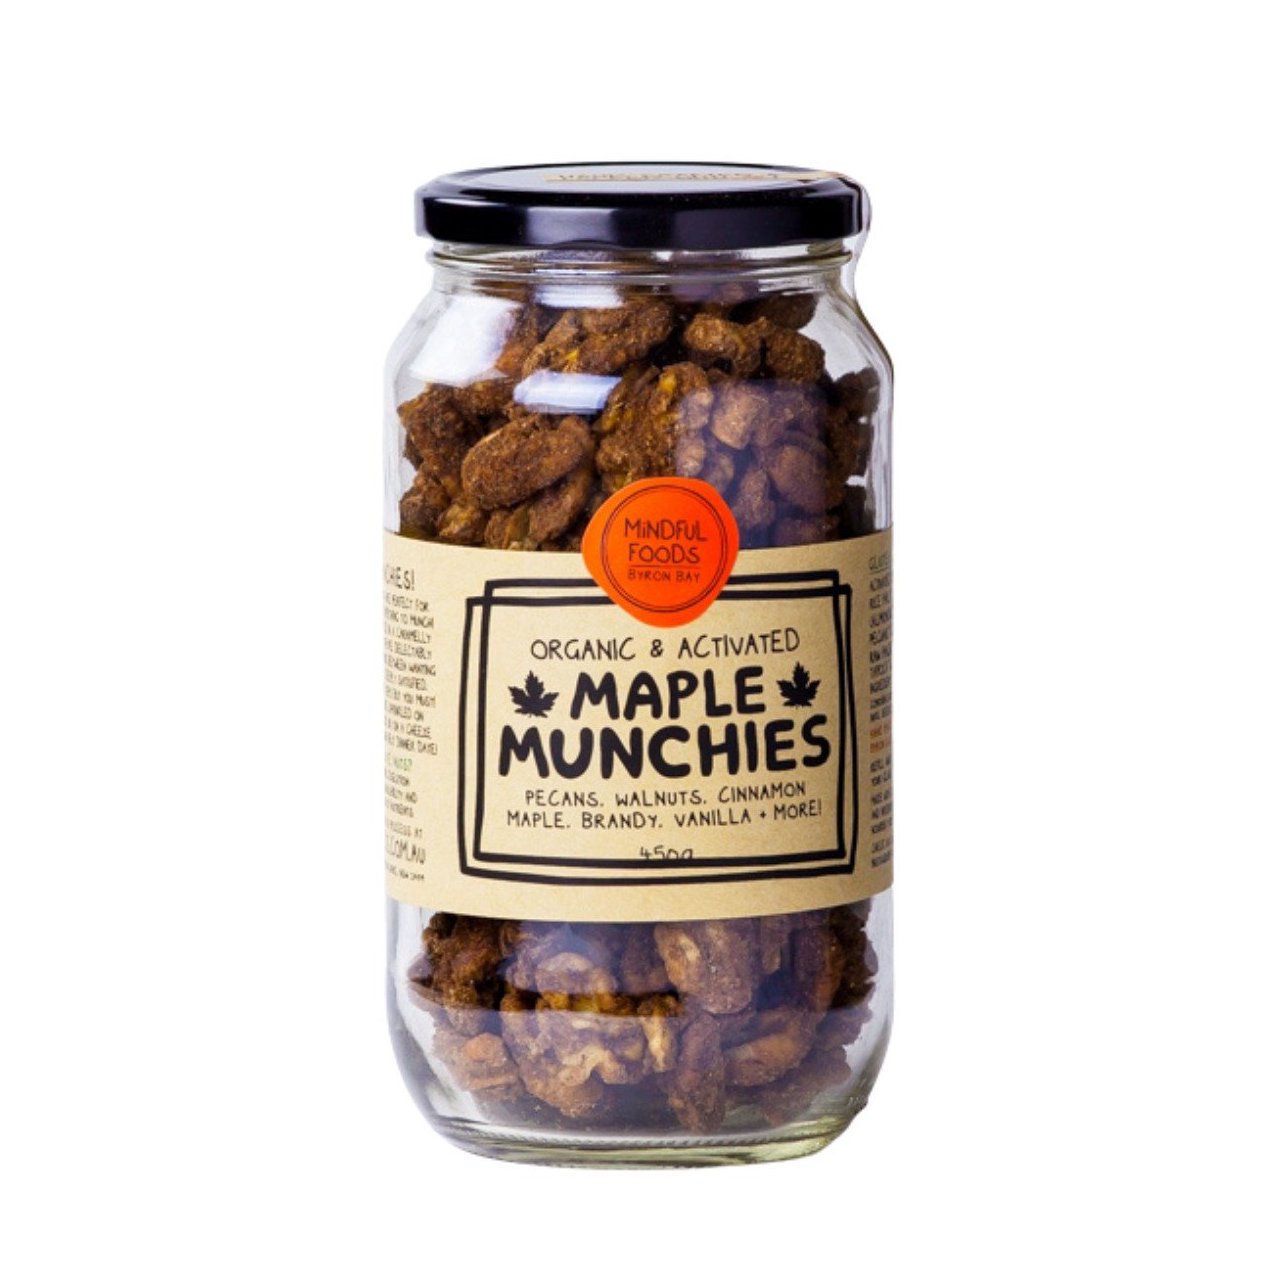 Mindful Foods Maple Munchies 200g, 400g Or 1kg, Cinnamon & Nut Butter Organic & Activated)